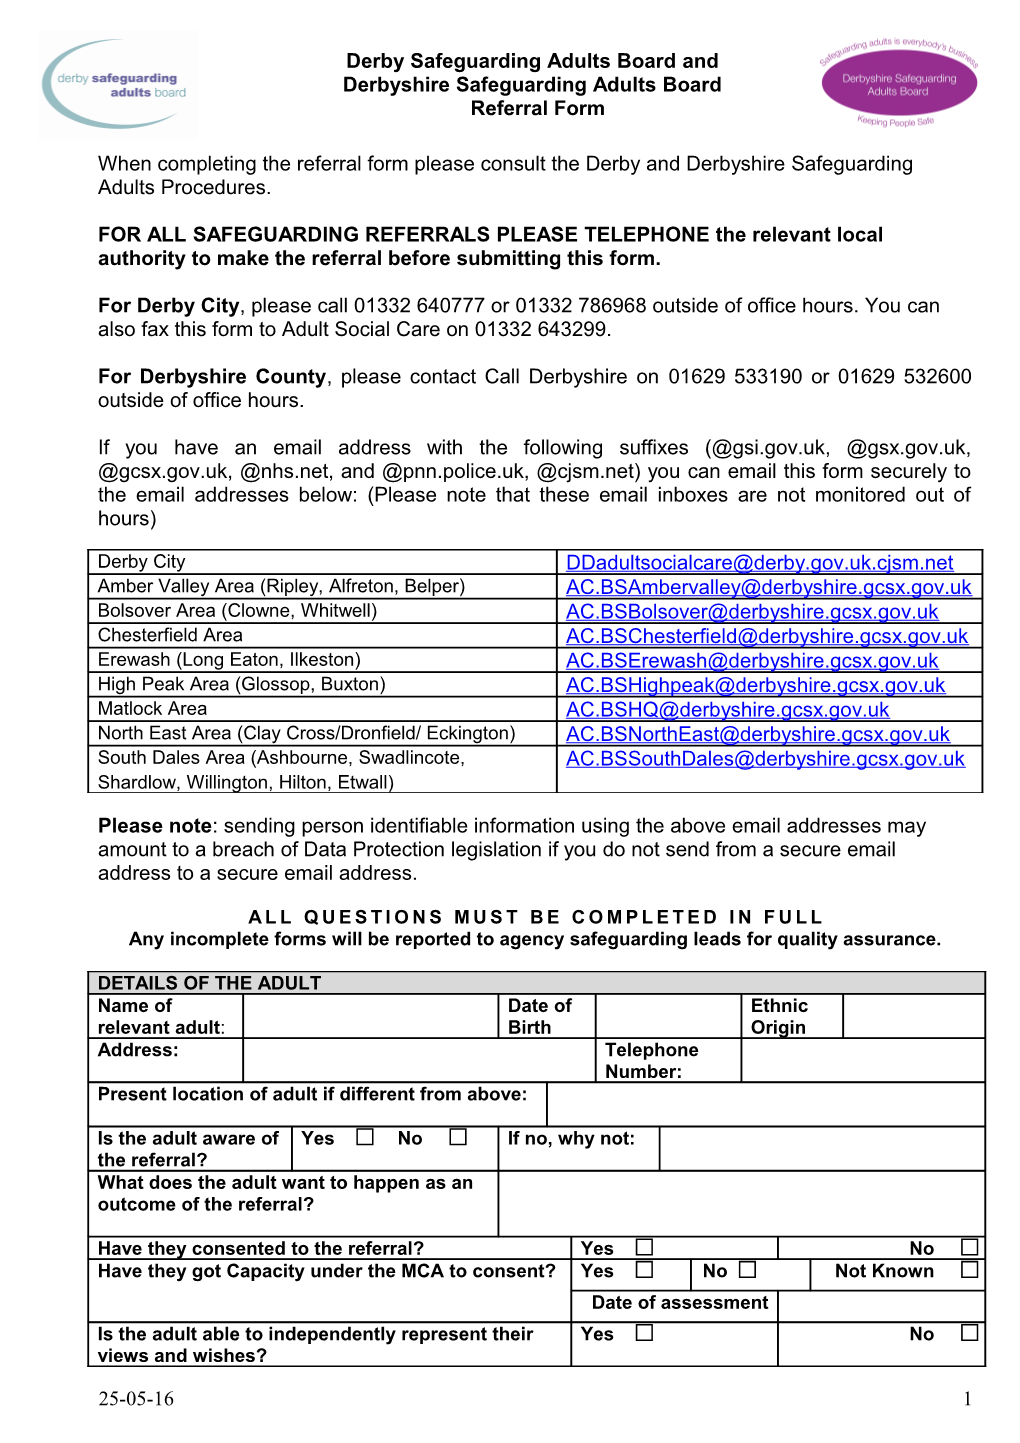 Safeguarding Adults Referral Form